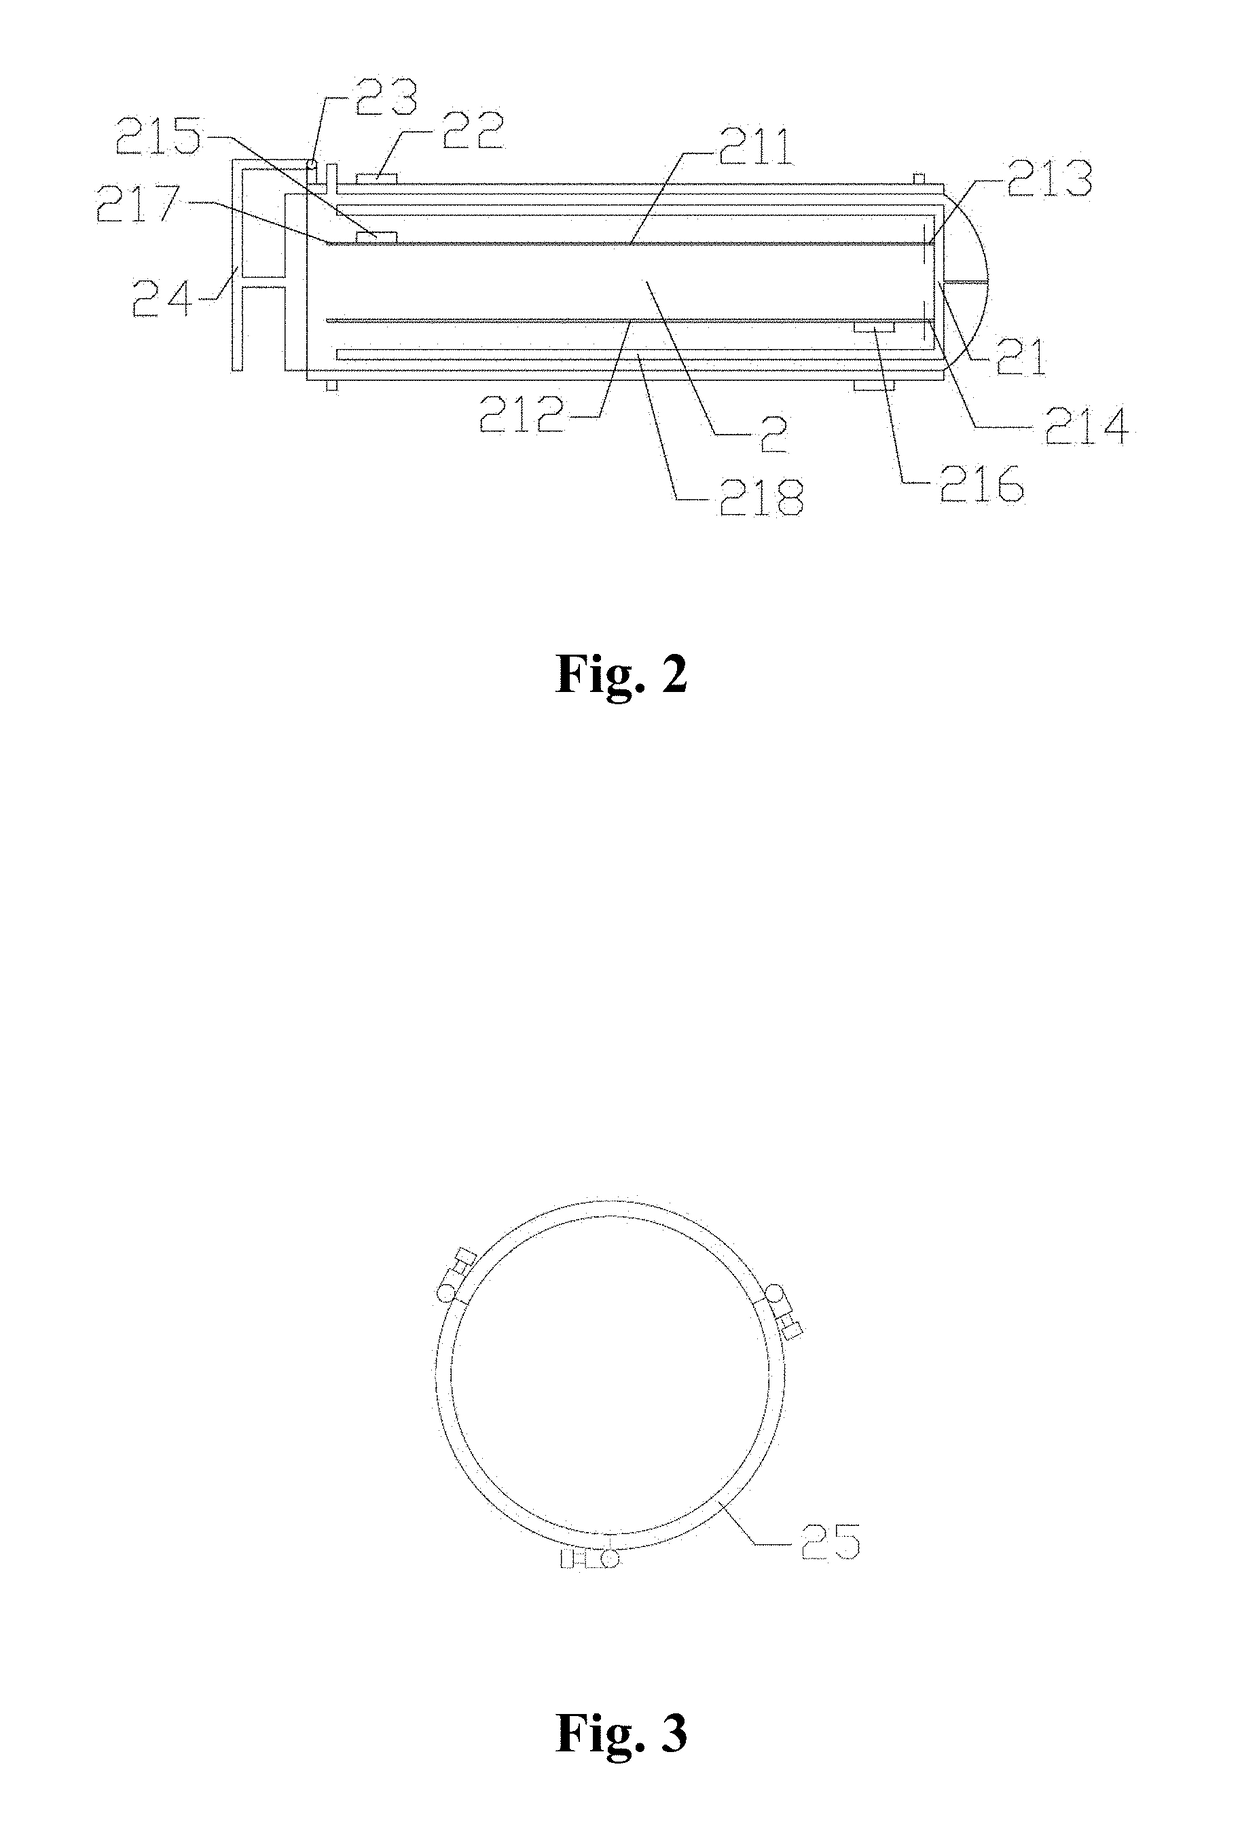 Supercritical fluid dyeing and finishing system and method